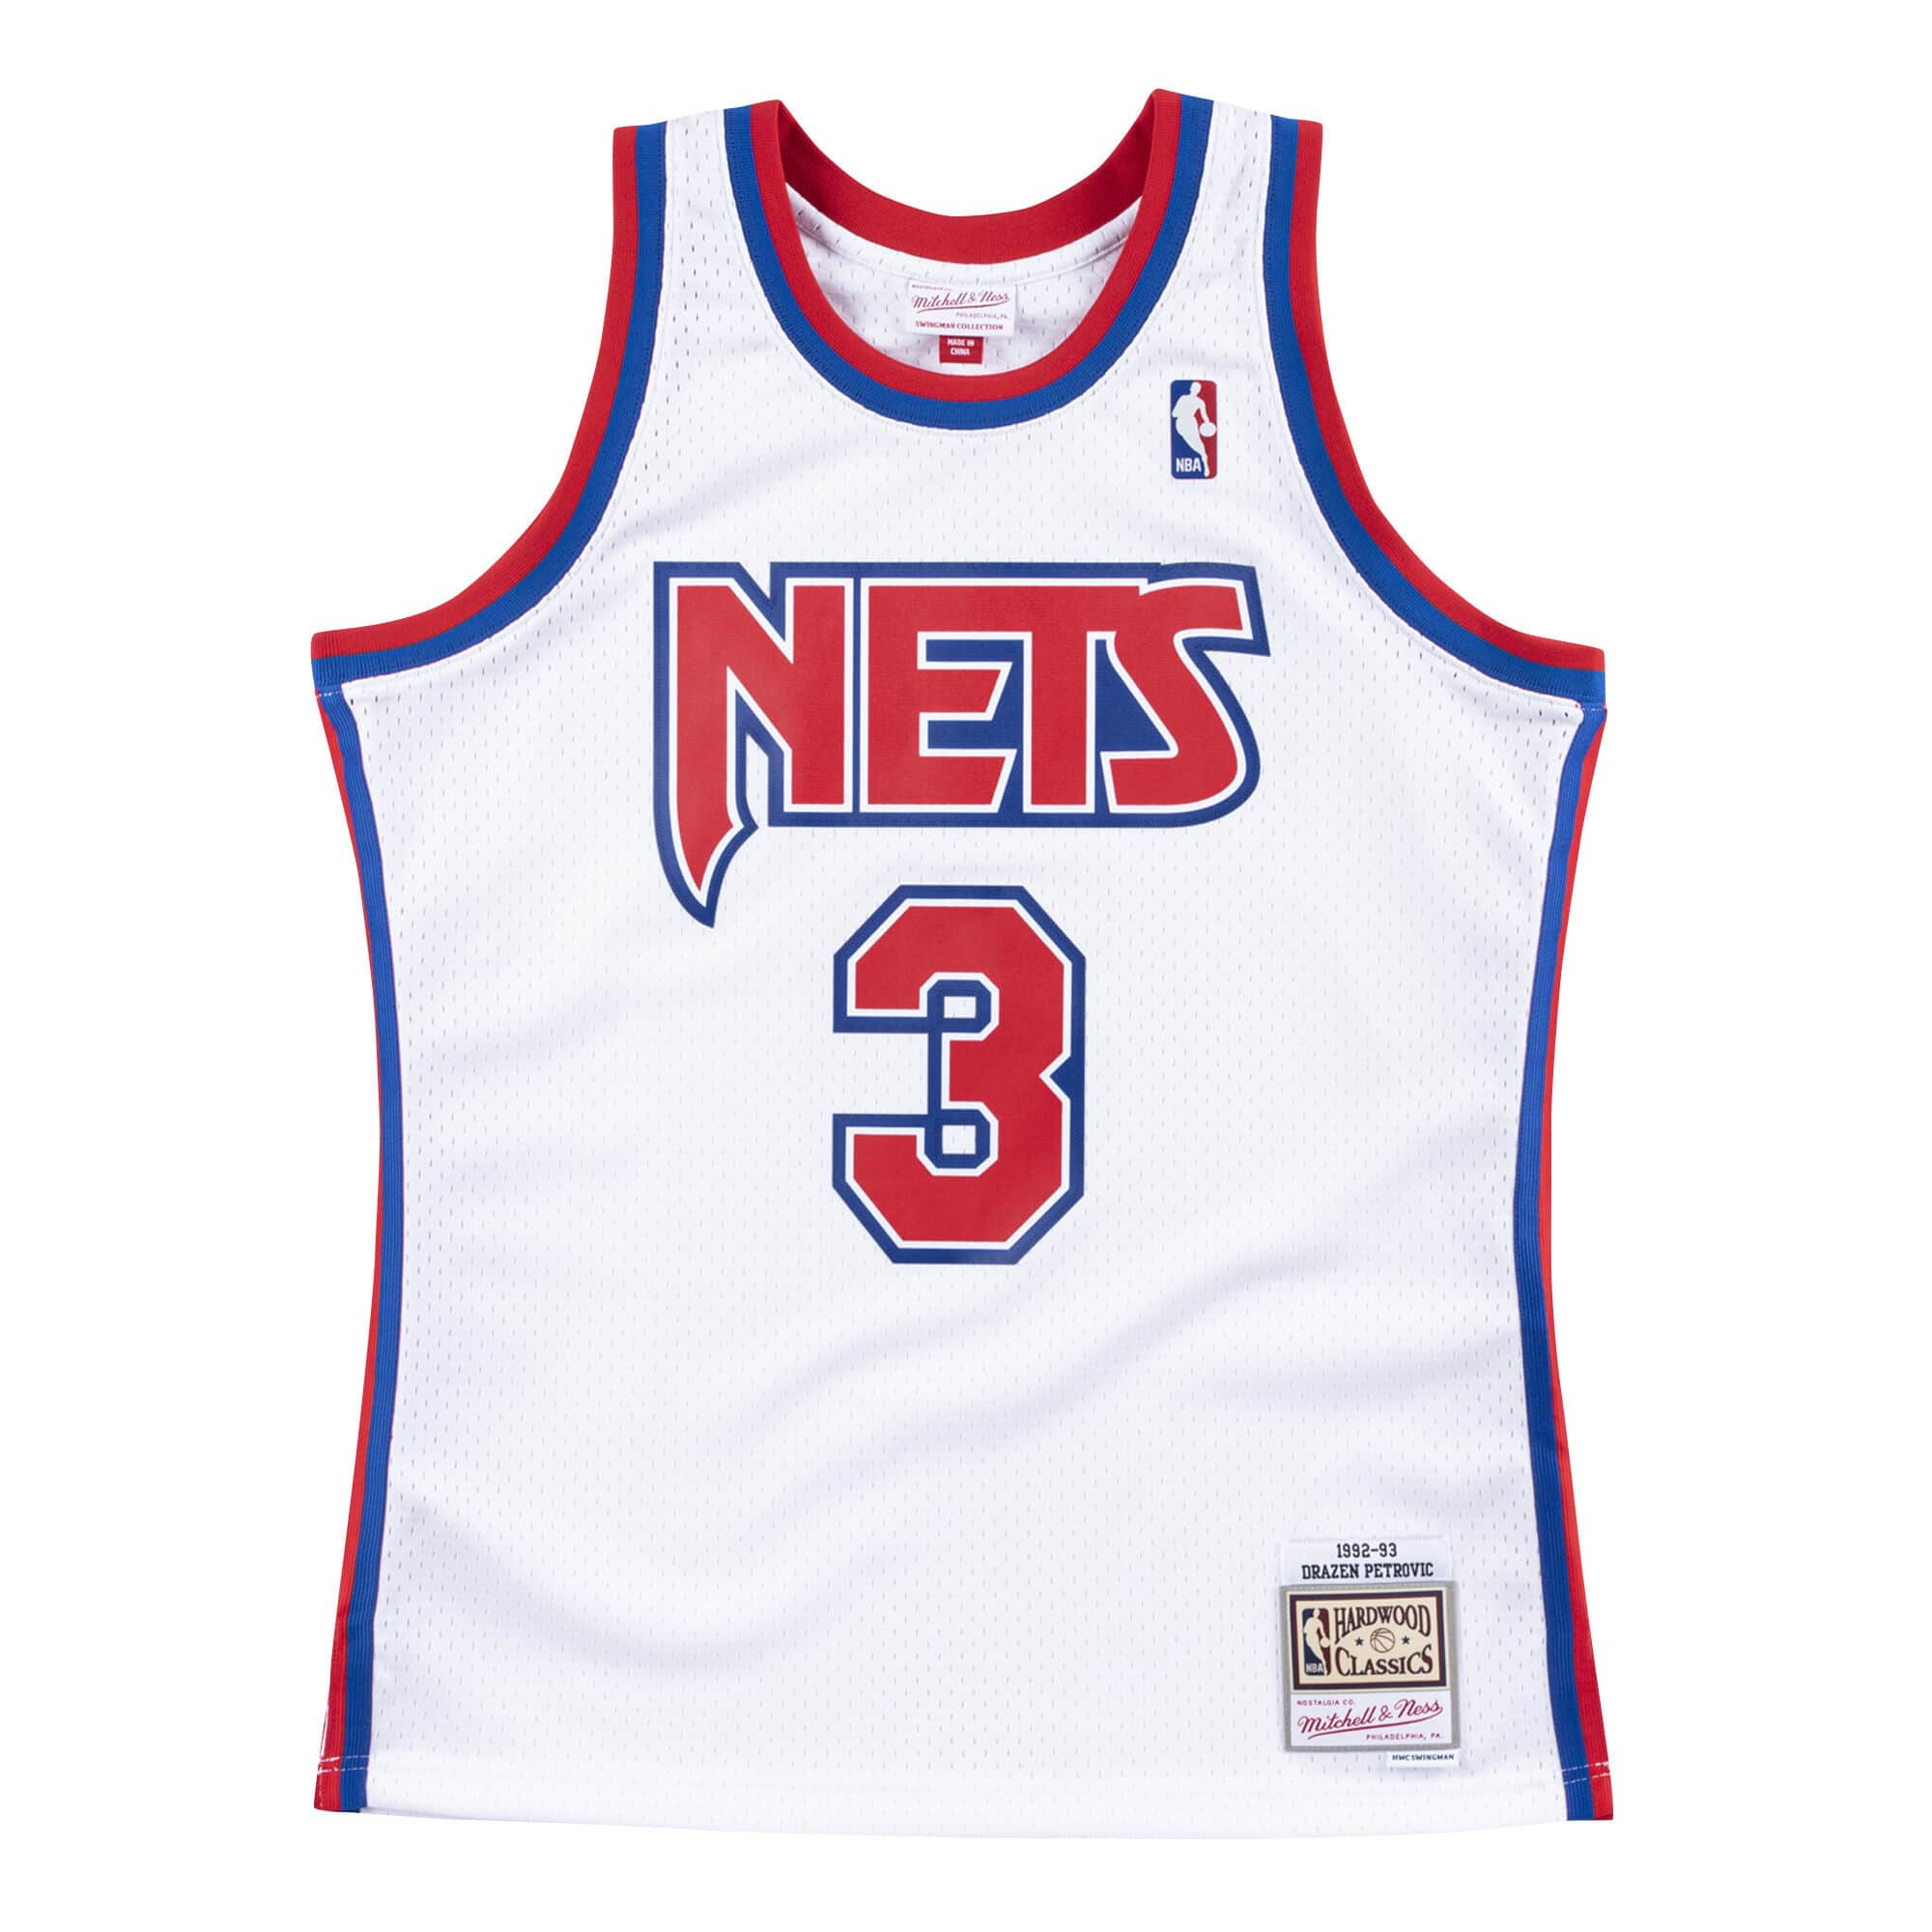 nets red white and blue jersey